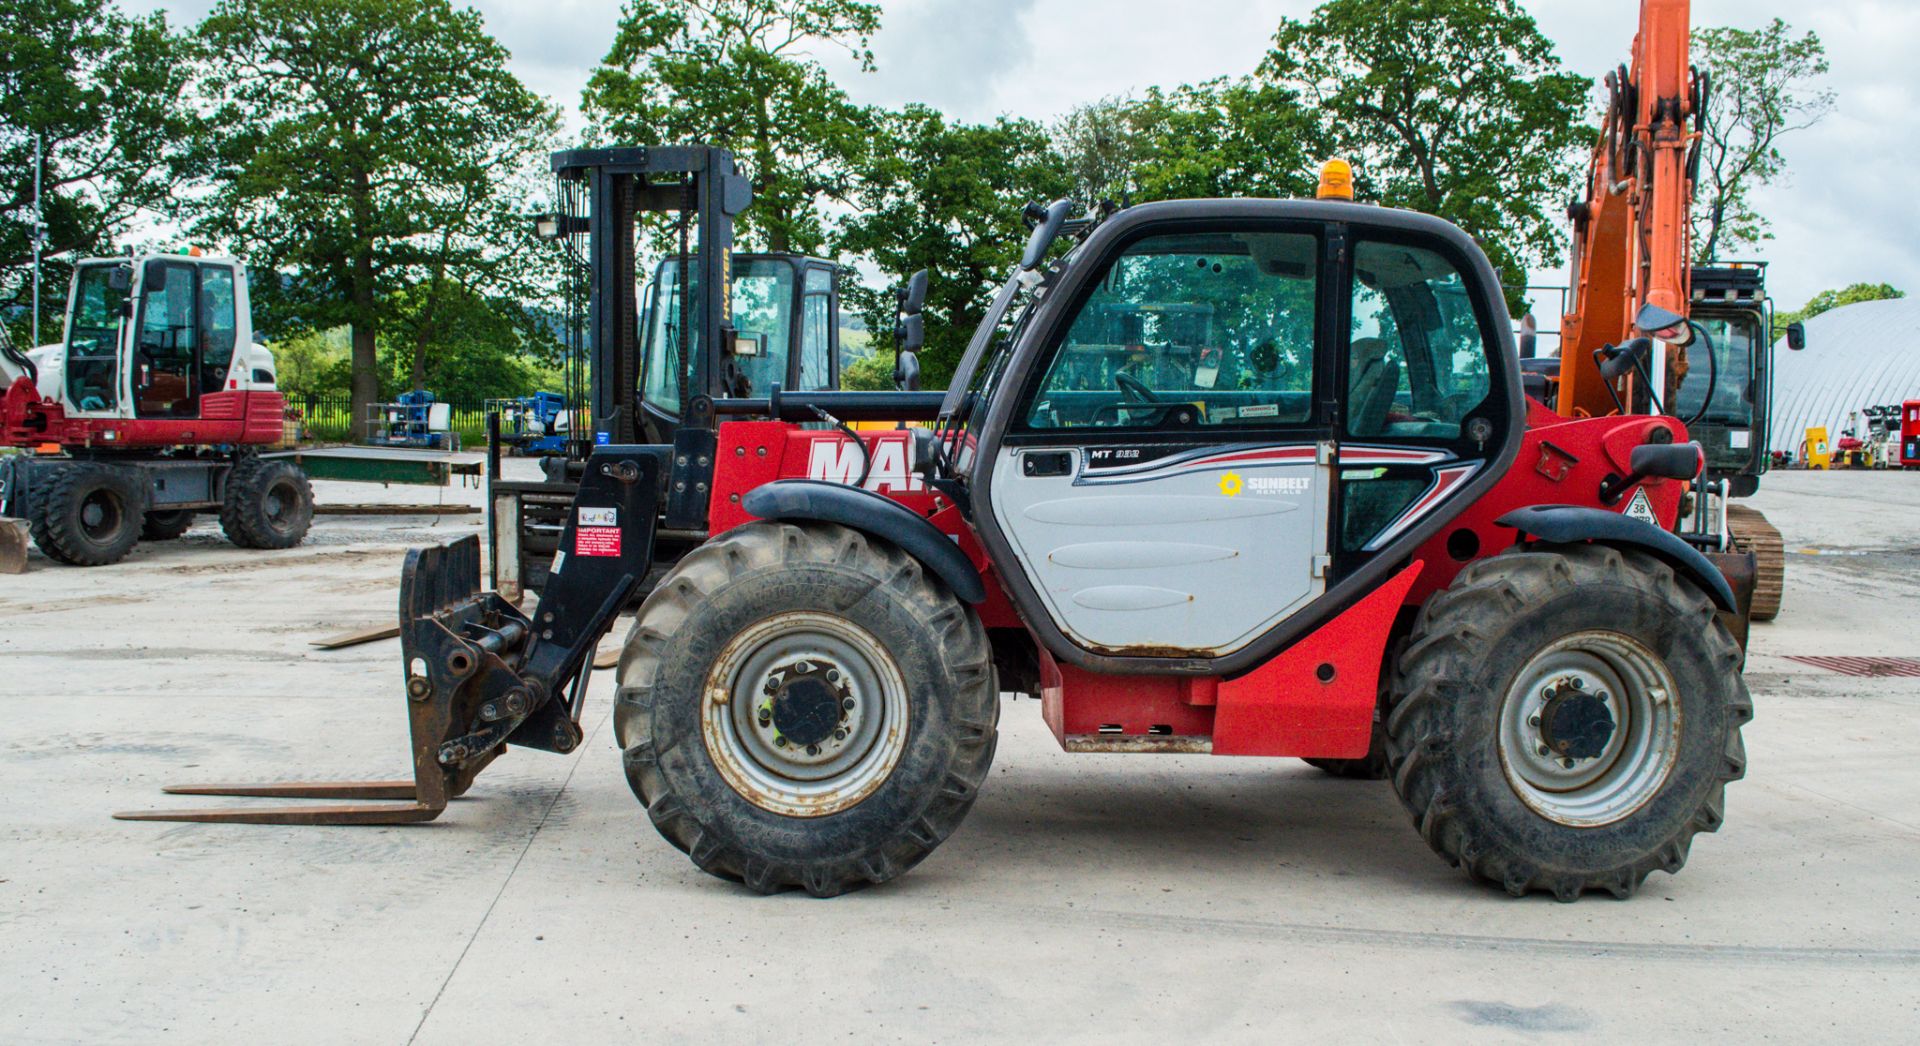 Manitou MT932 9 metre telescopic handler Year: 2014 S/N: 940923 Recorded Hours: not displayed (Clock - Image 8 of 24